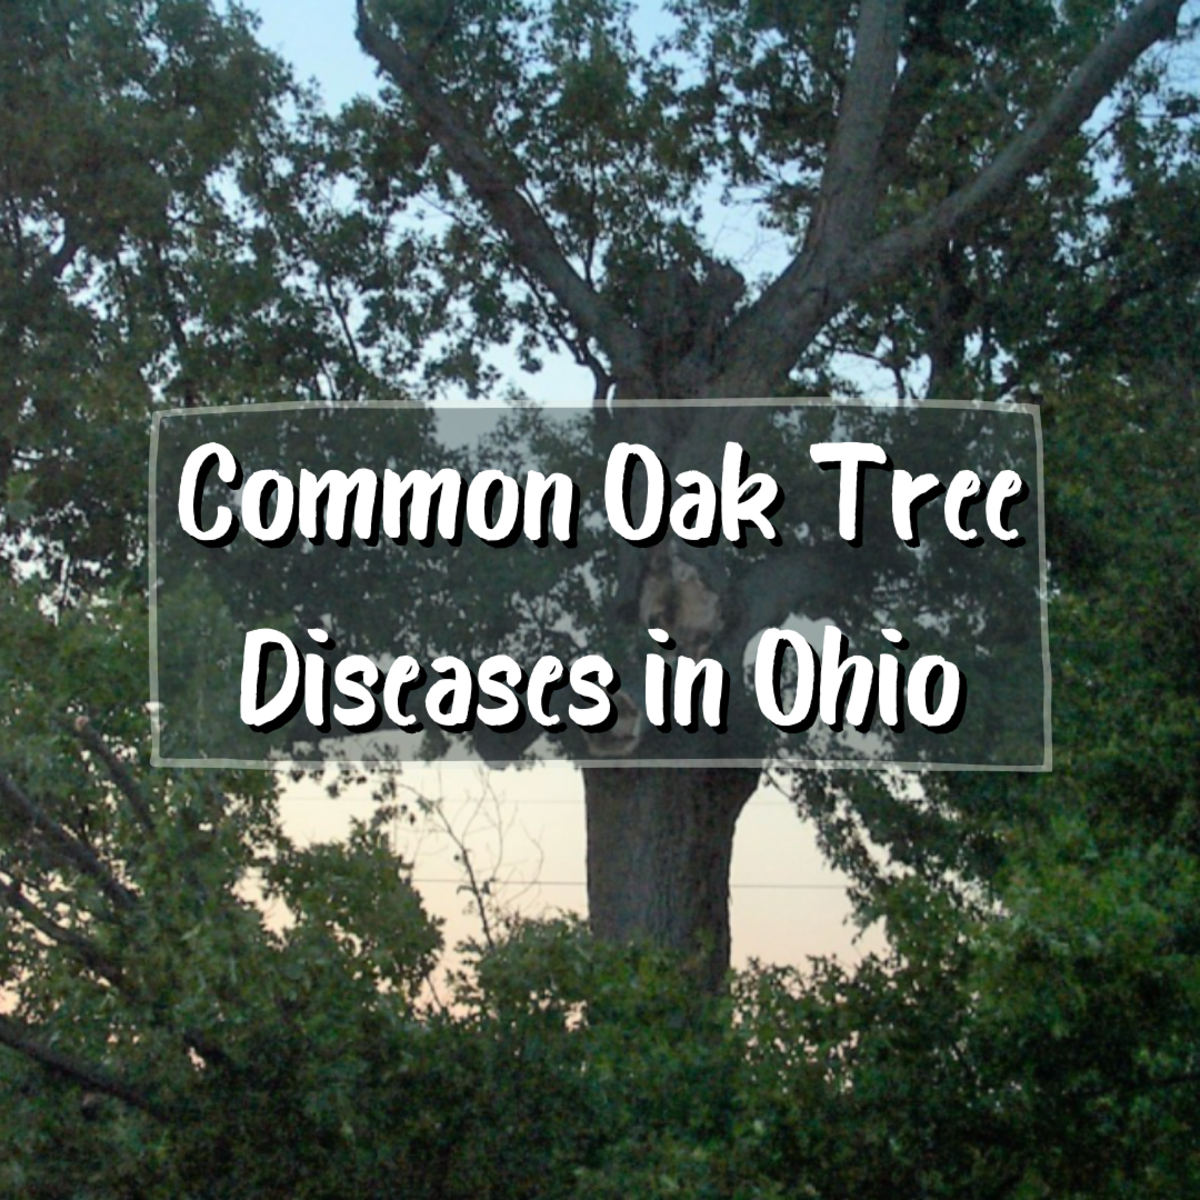 Oak trees in Ohio are truly dazzling in the summer evening light. Unfortunately, oak tree diseases in Ohio are fairly common and these trees are susceptible to them. Read on to learn about the varieties of oak and their common diseases.